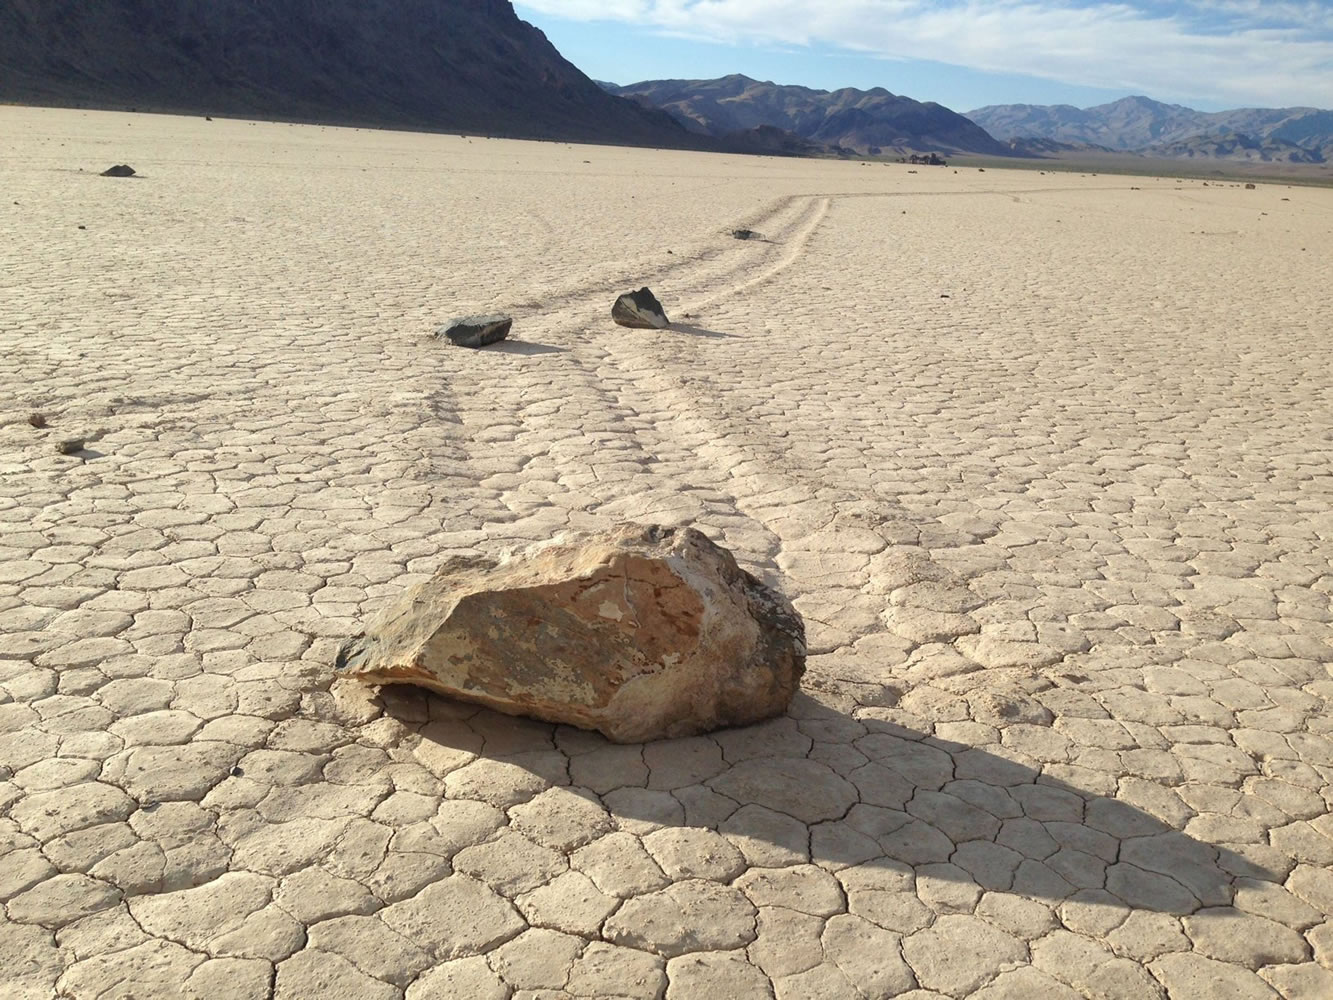 A few of the hundreds of rocks that have left trails as they moved across the surface of Racetrack Playa in California's Death Valley National Park on August 18, 2014. There were several theories for the strange activity, but Richard Norris, a paleobiologist at Scripps Institution of Oceanography, and his cousin James Norris, a research engineer, were the first to photograph rocks in motion.